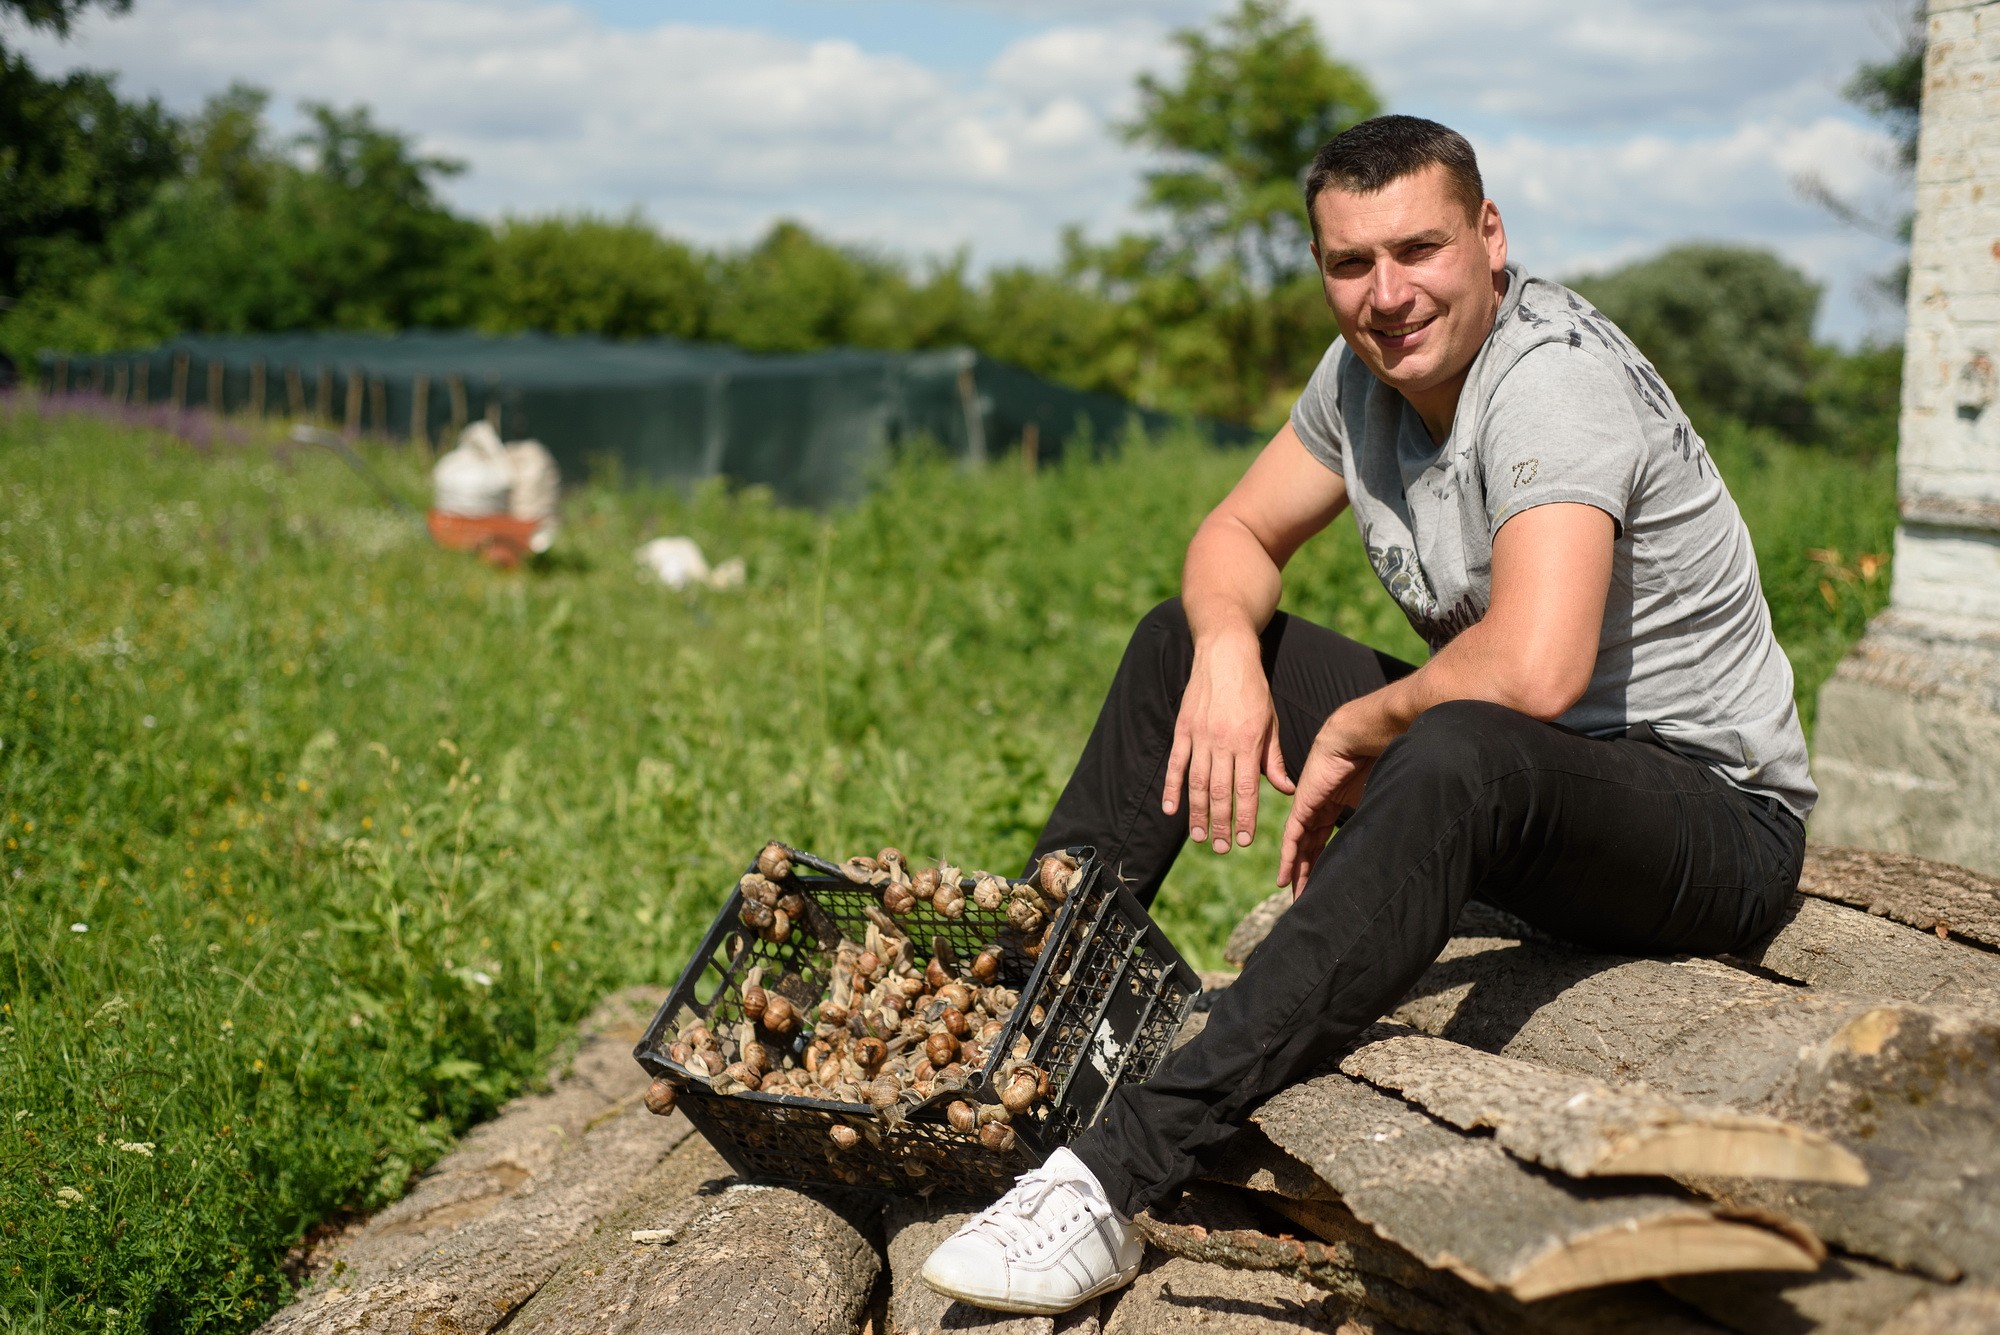 Dmytro Butenko, founder of the Eco Ulitka farm, poses for a photo with his snails. ( Courtesy)